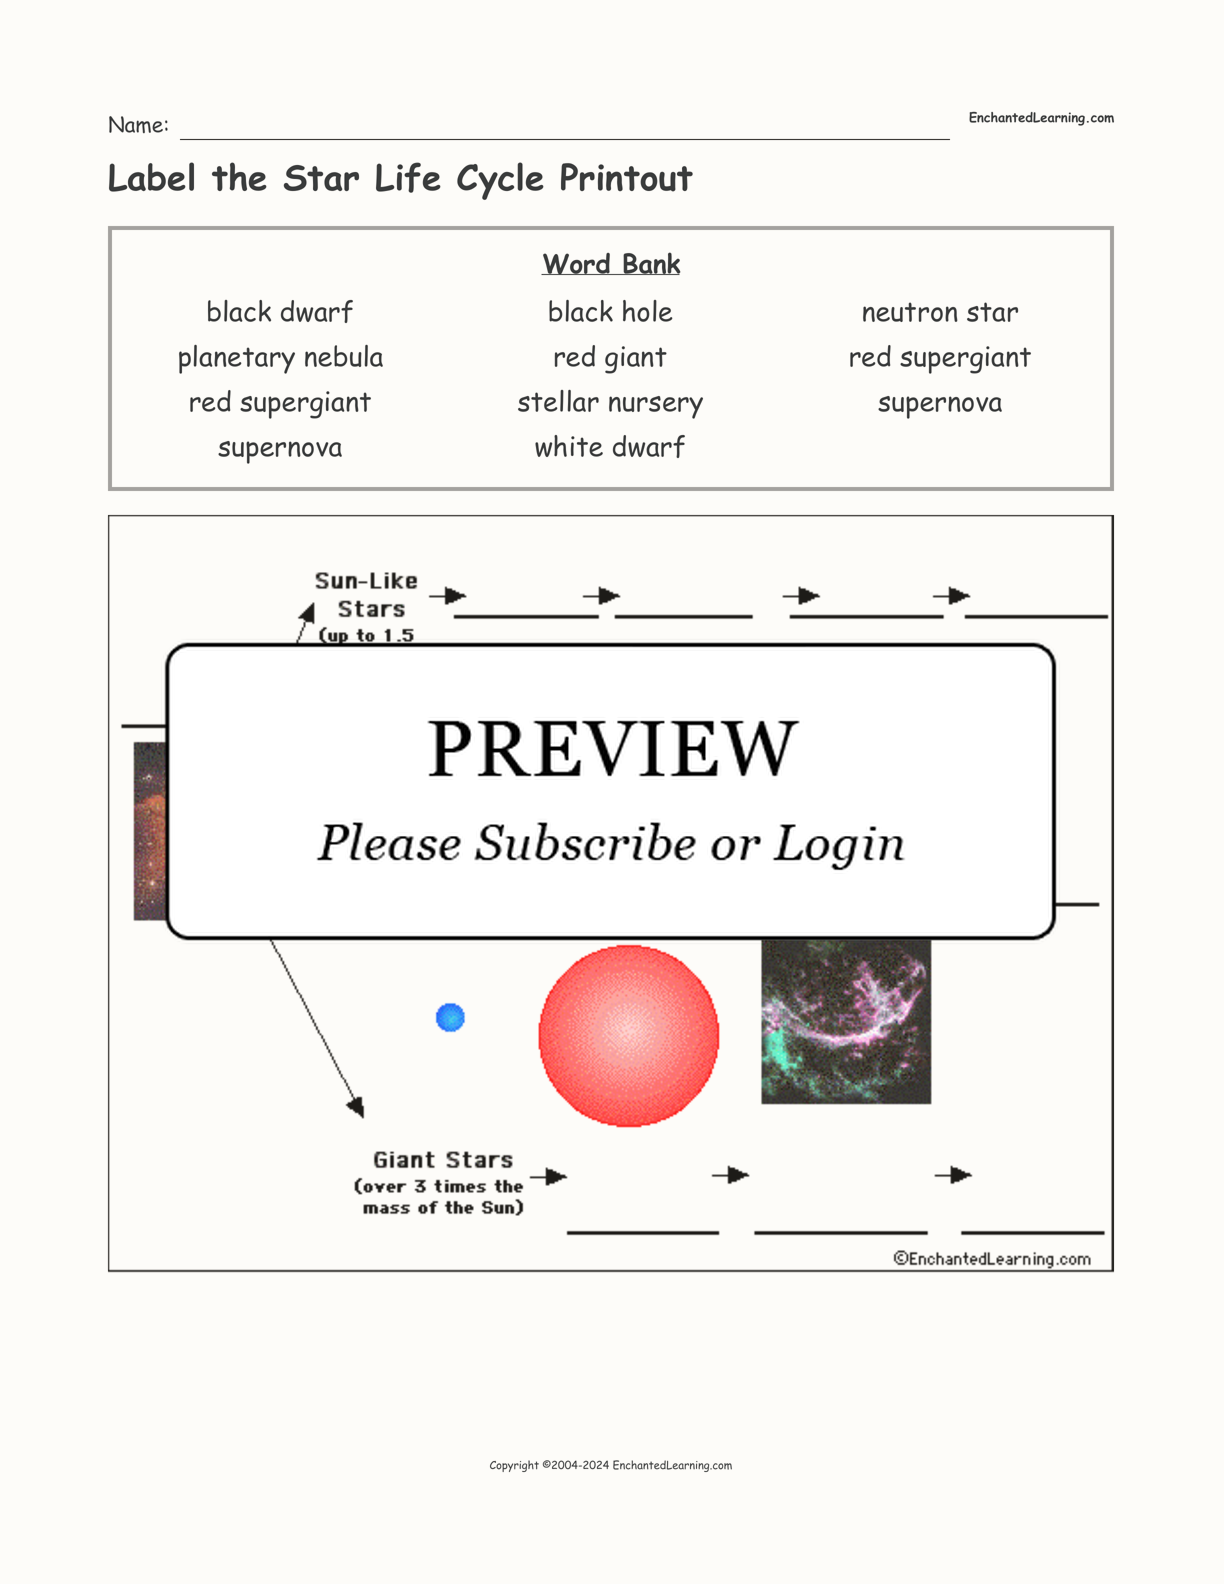 Label the Star Life Cycle Printout interactive worksheet page 1